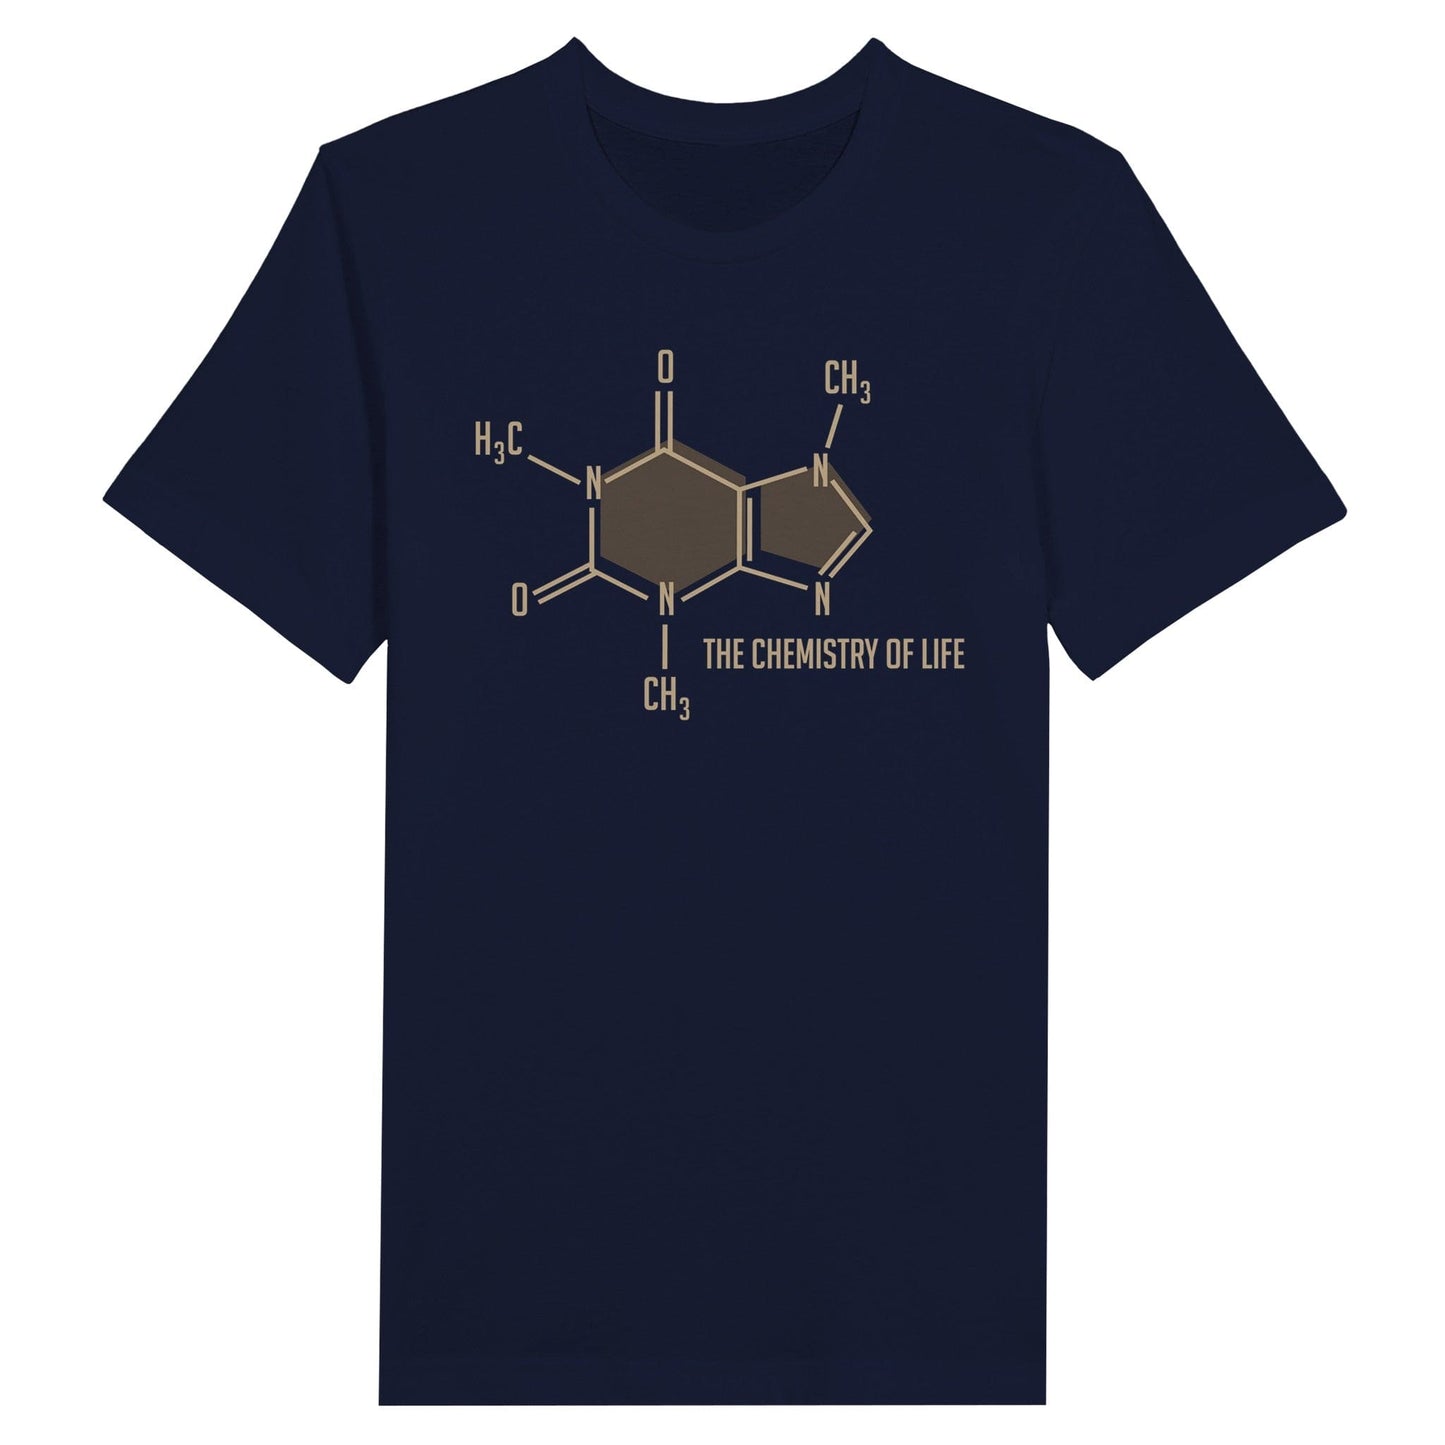 Good Bean Gifts "The Chemistry of Life" Unisex Crewneck T-shirt Navy / S